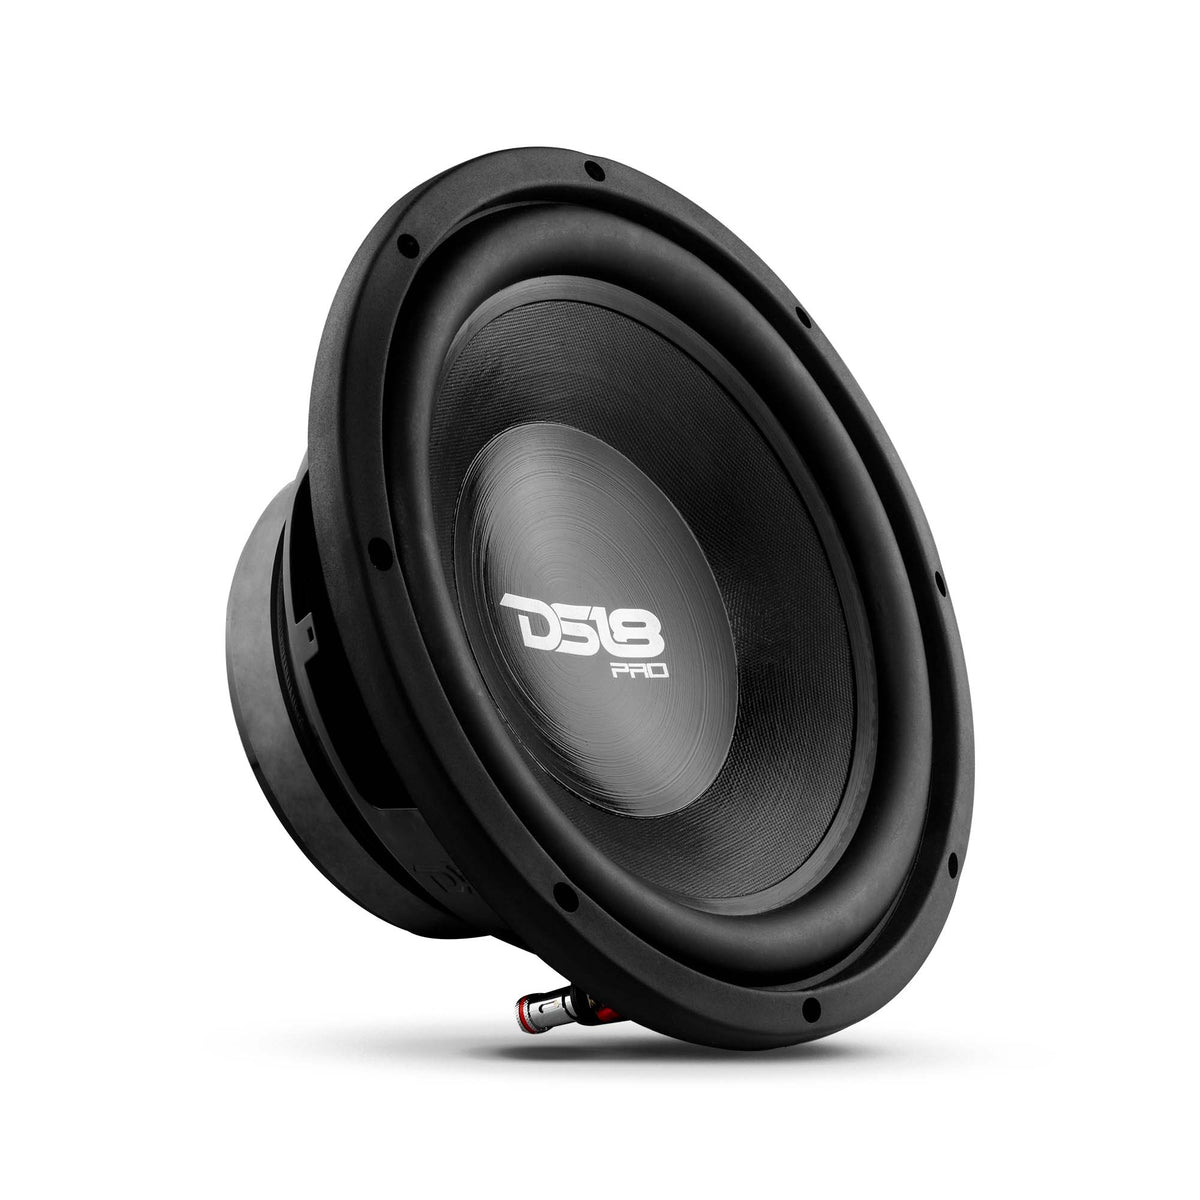 DS18 PRO 10" Water Resistant Cone, Woofer 2-Ohms SVC (1 Speaker) audio subwoofers car home system  motorcycle loud subwoofer